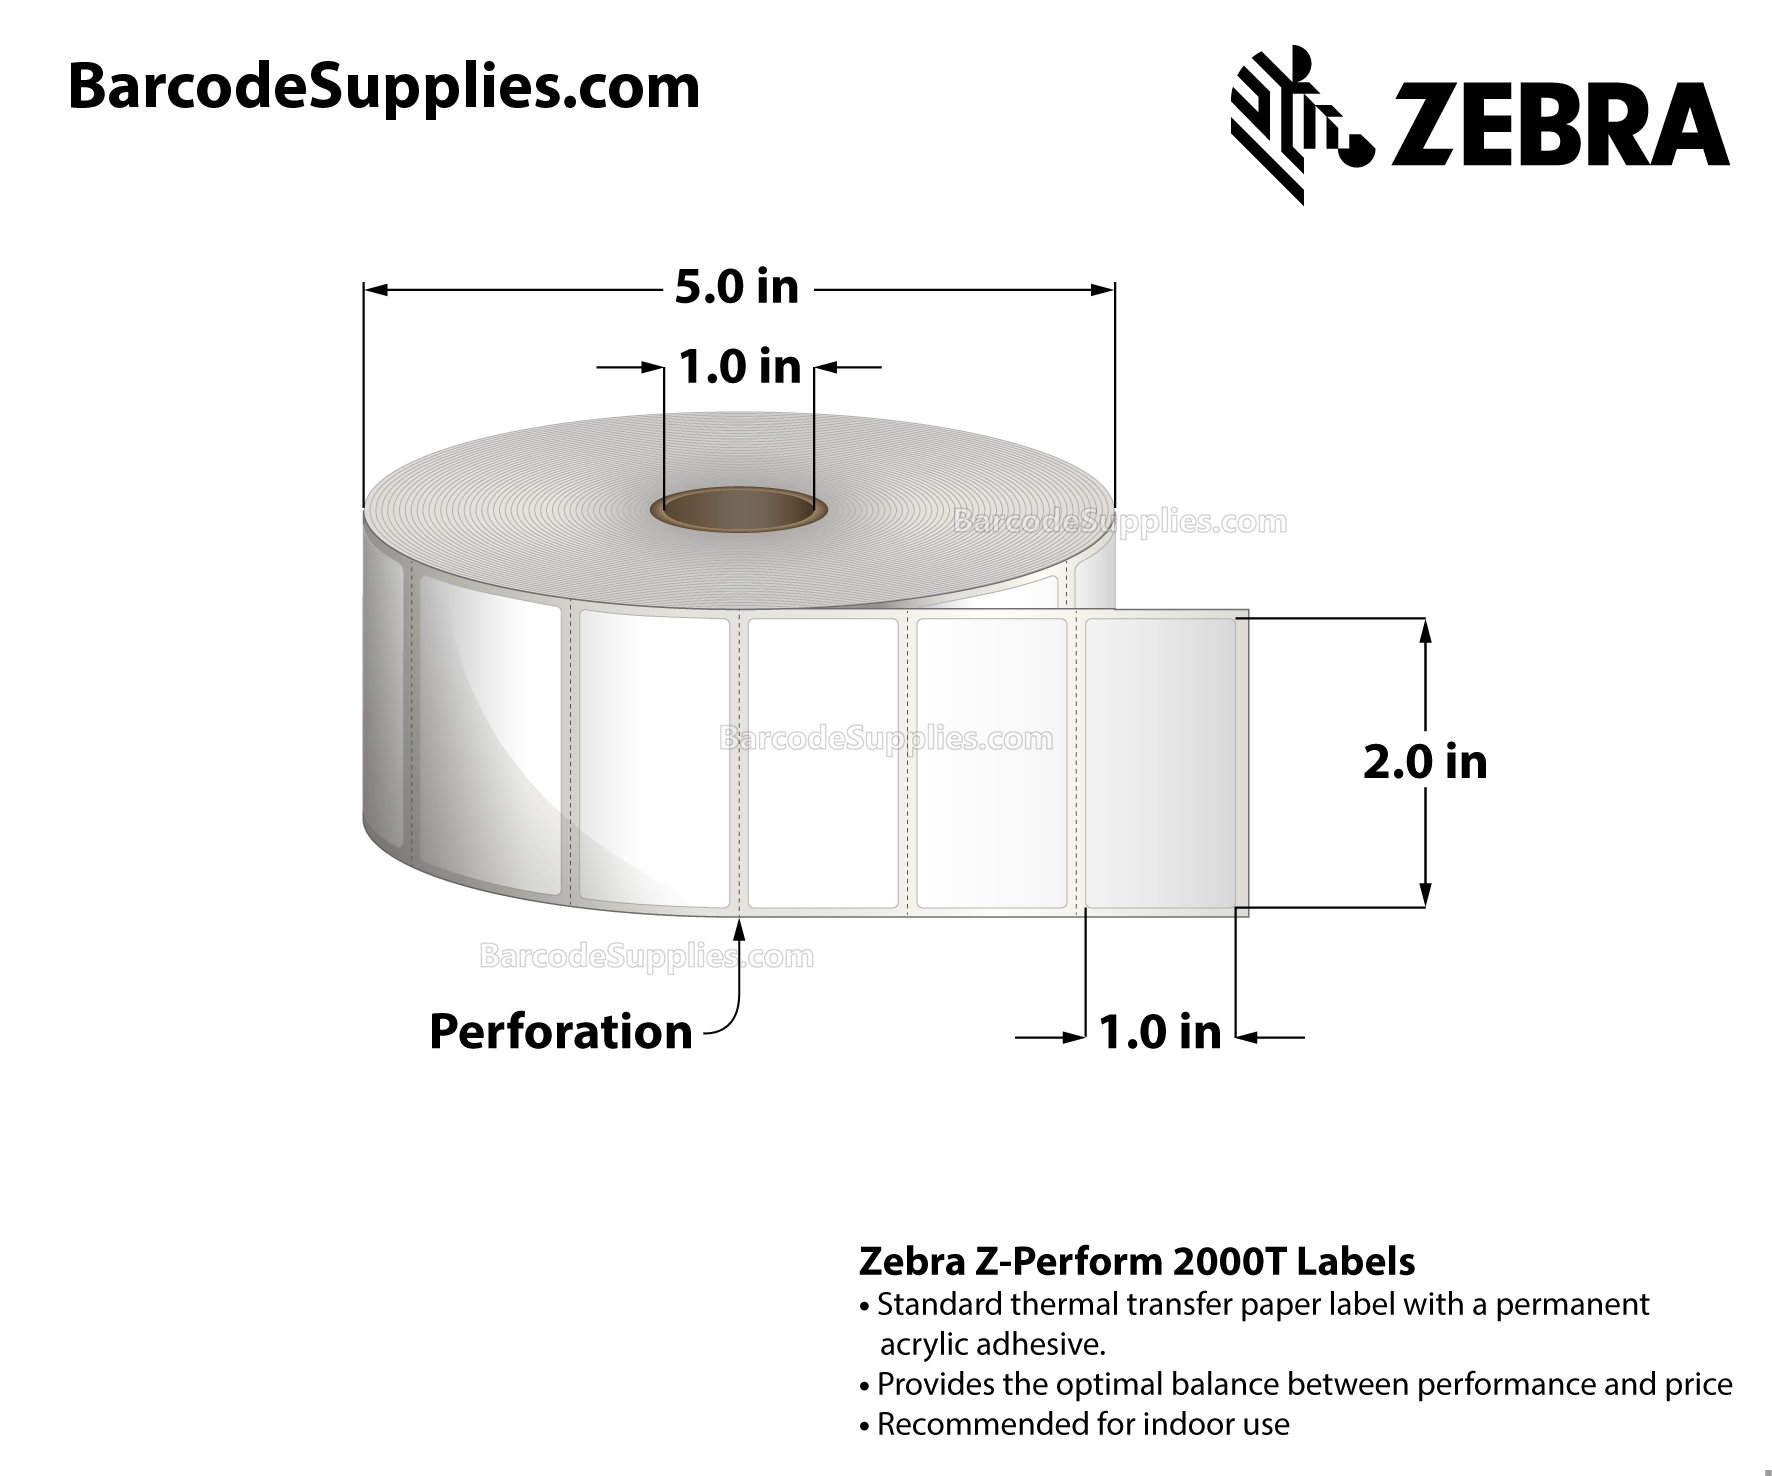 2 x 1 Thermal Transfer White Z-Perform 2000T Labels With Permanent Adhesive - Perforated - 2490 Labels Per Roll - Carton Of 6 Rolls - 14940 Labels Total - MPN: 10005850